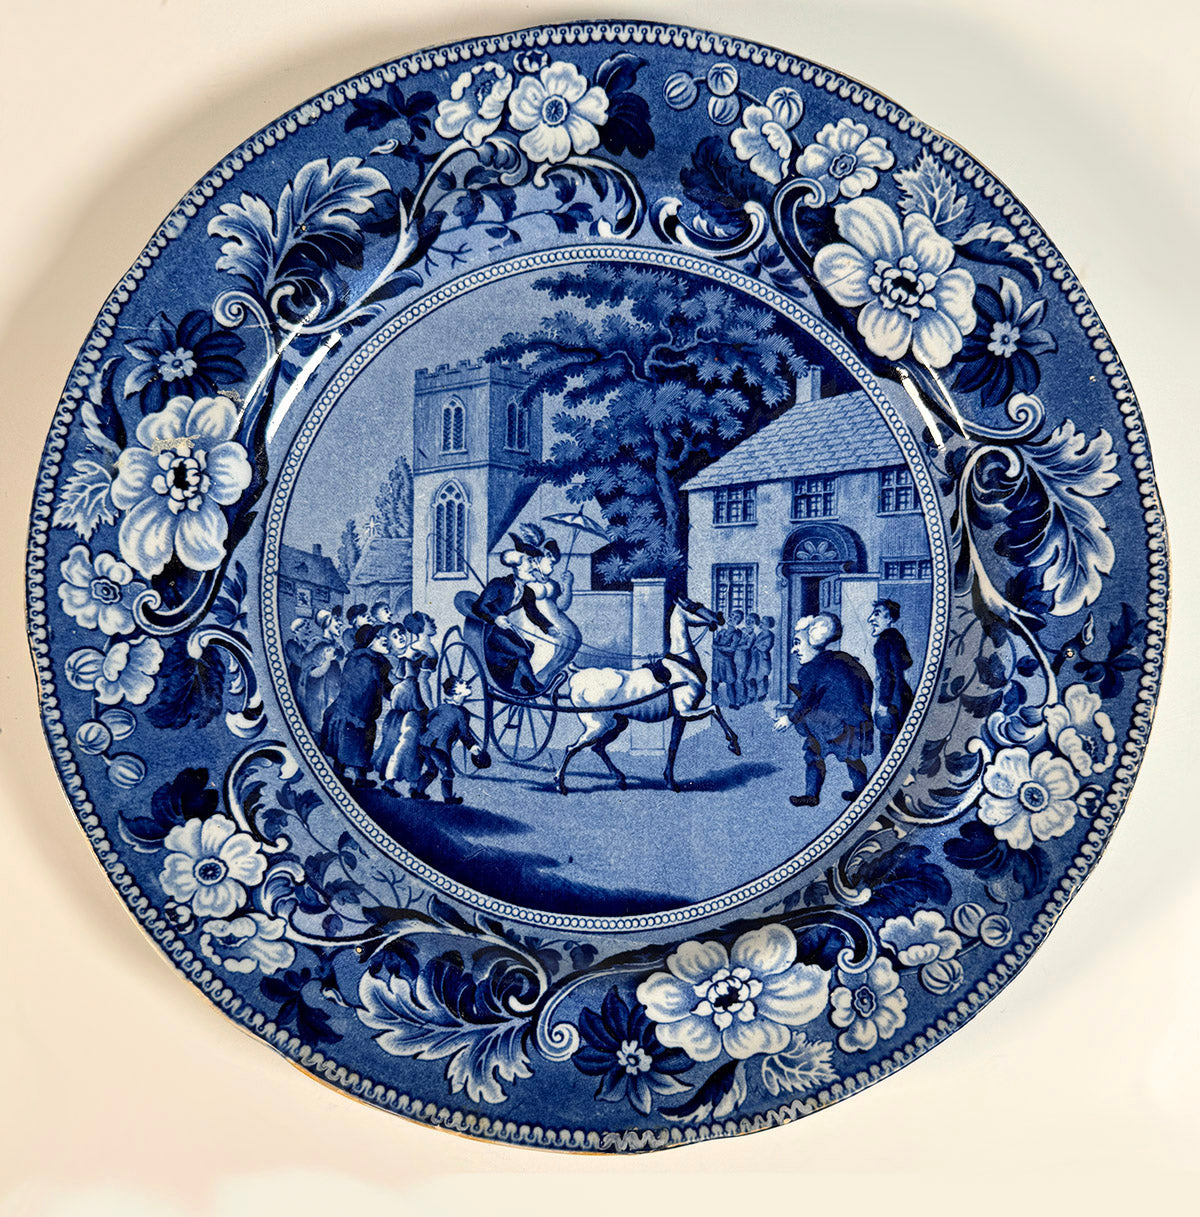 RARE Antique Early 1800s CLEWS plate. "Doctor Syntax taking Possession of his Living" Staffordshire Blue Transferware